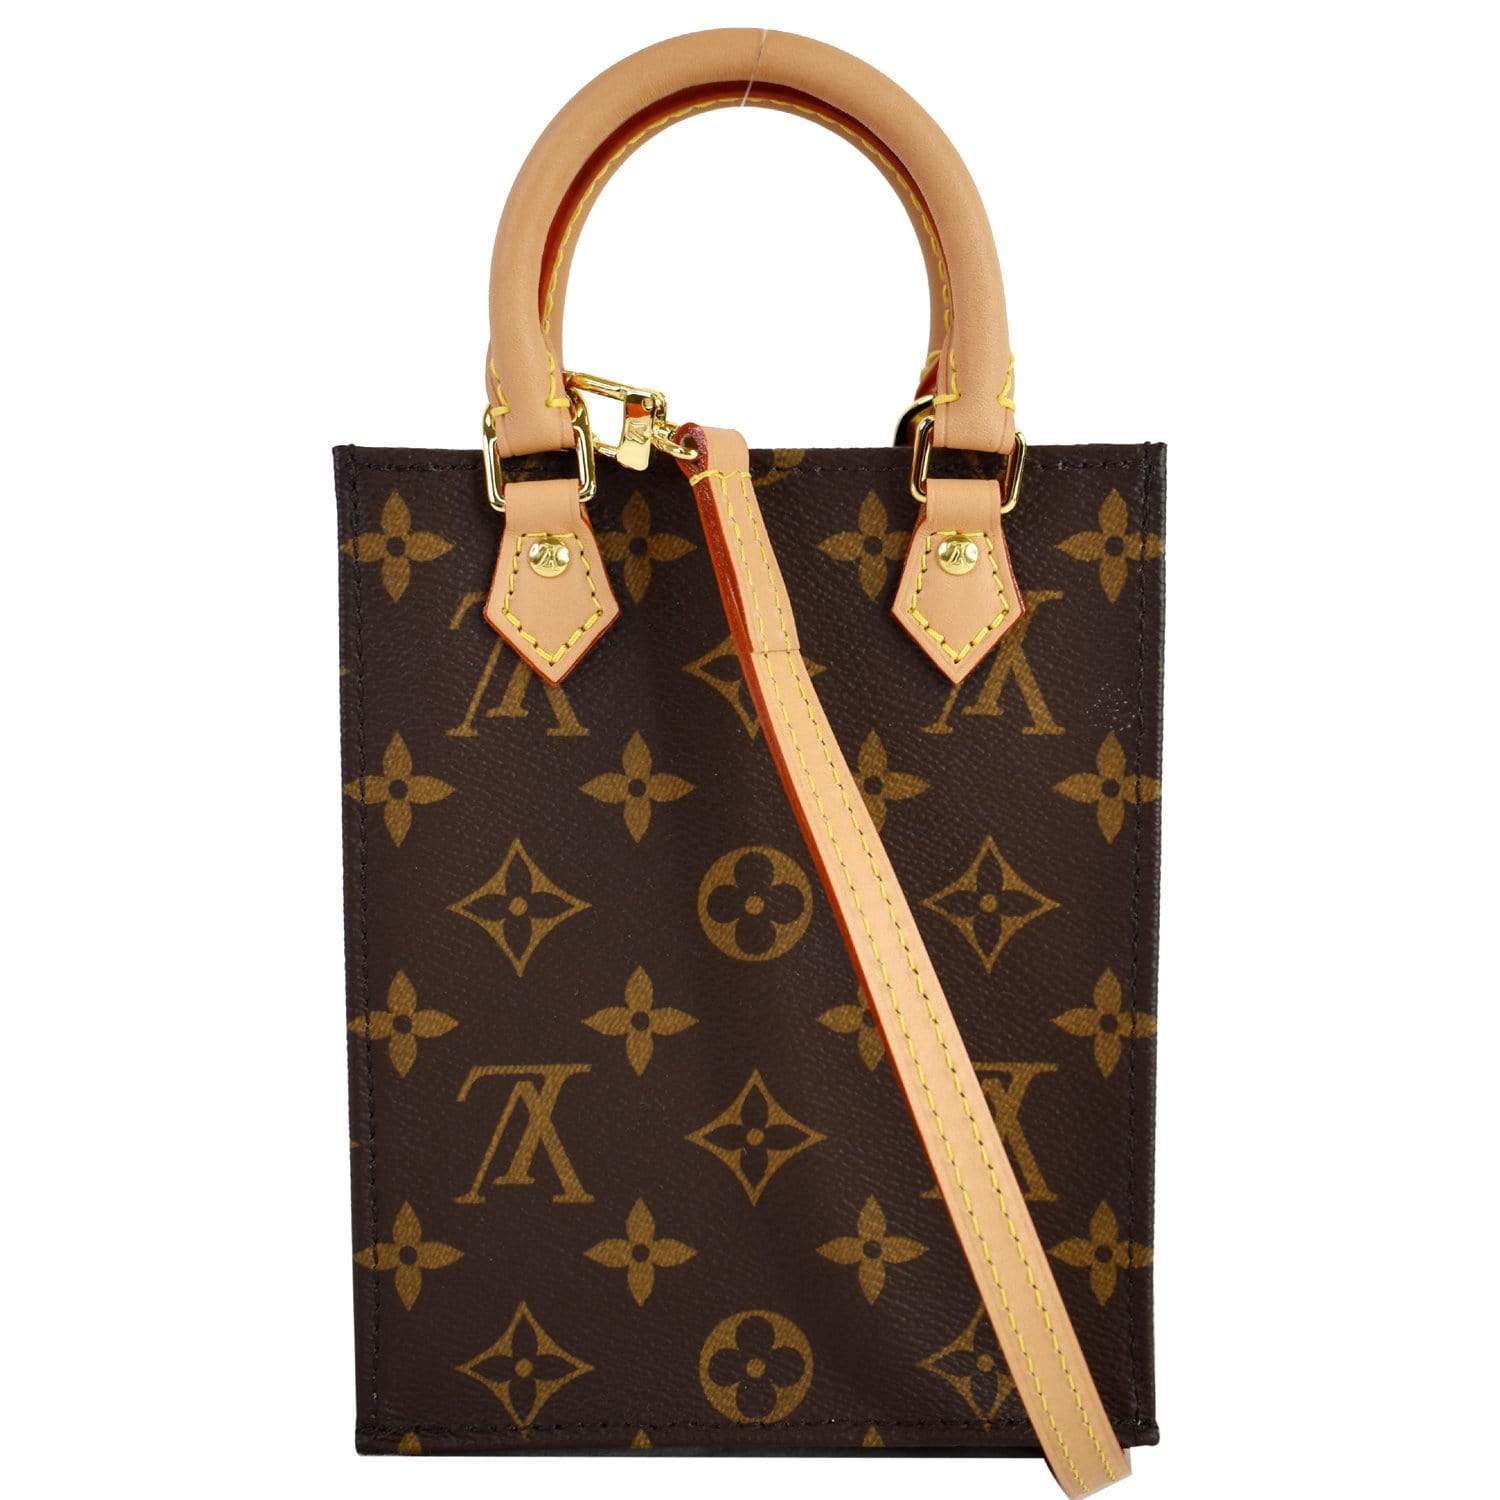 Tried on a petite sac plat in epi and it confirmed my need for the monogram  canvas 🥰 : r/Louisvuitton